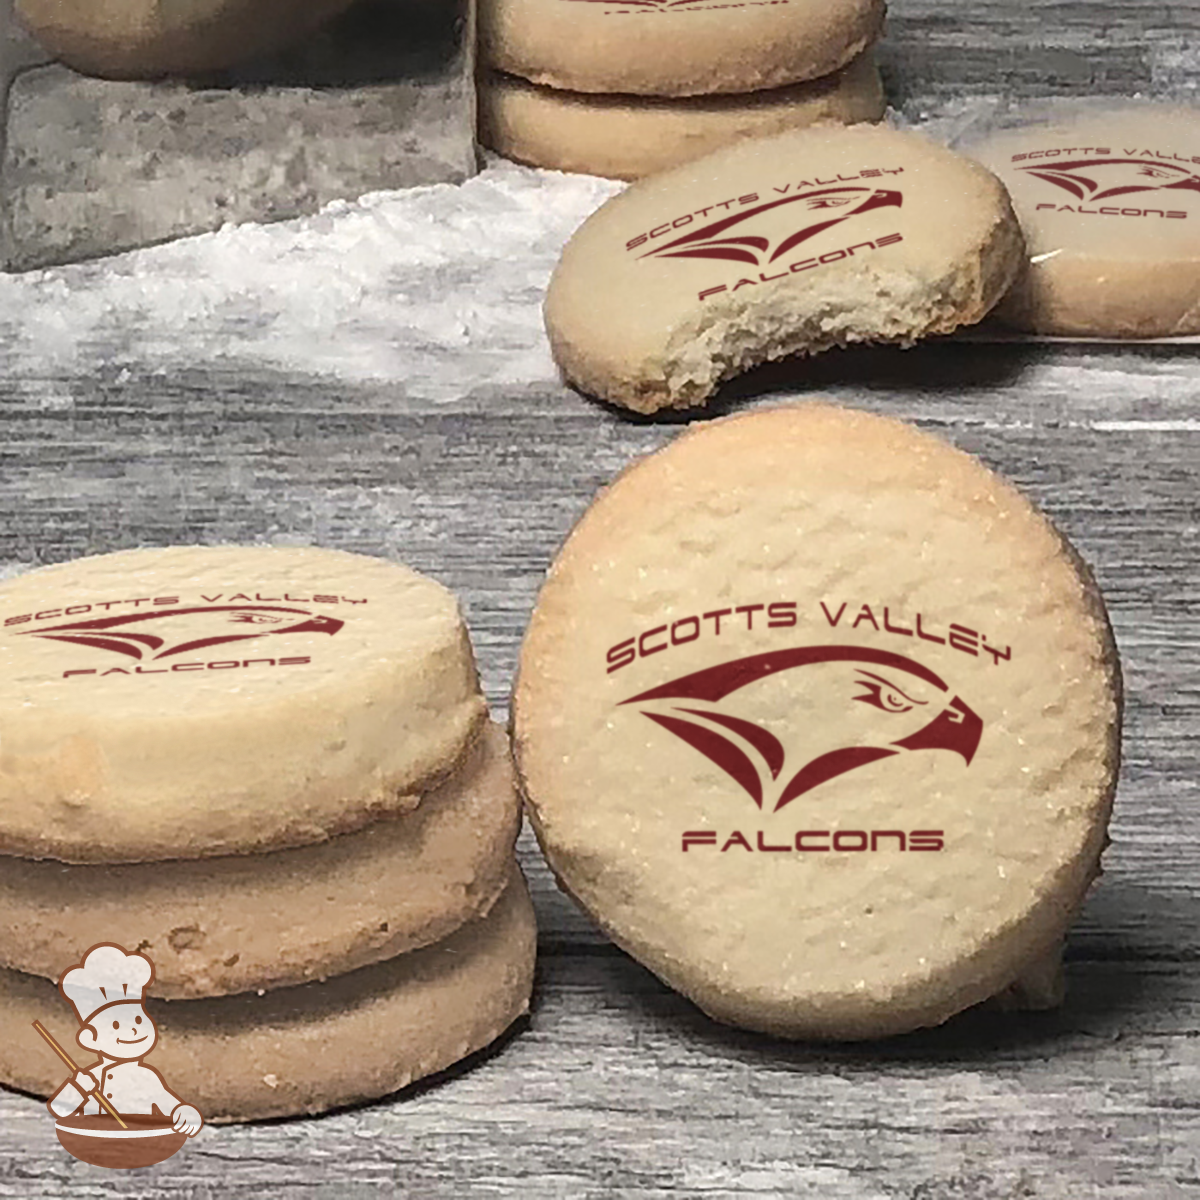 Go Scotts Valley Falcons Cookies (Round Unfrosted)